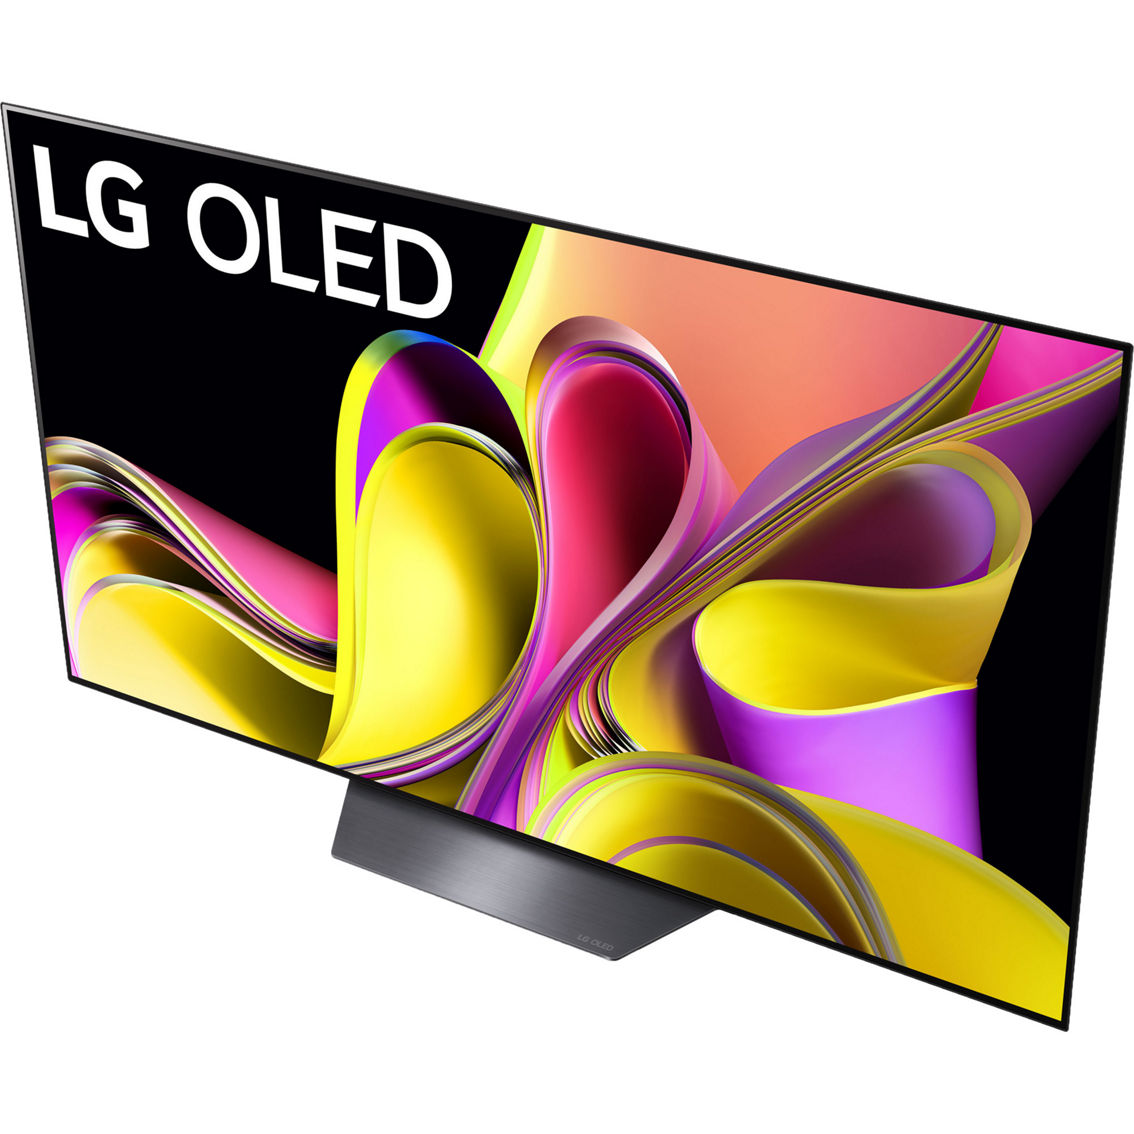 LG 65 in. OLED B3 4K HDR Smart TV with AI ThinQ and G-Sync OLED65B3PUA - Image 6 of 9